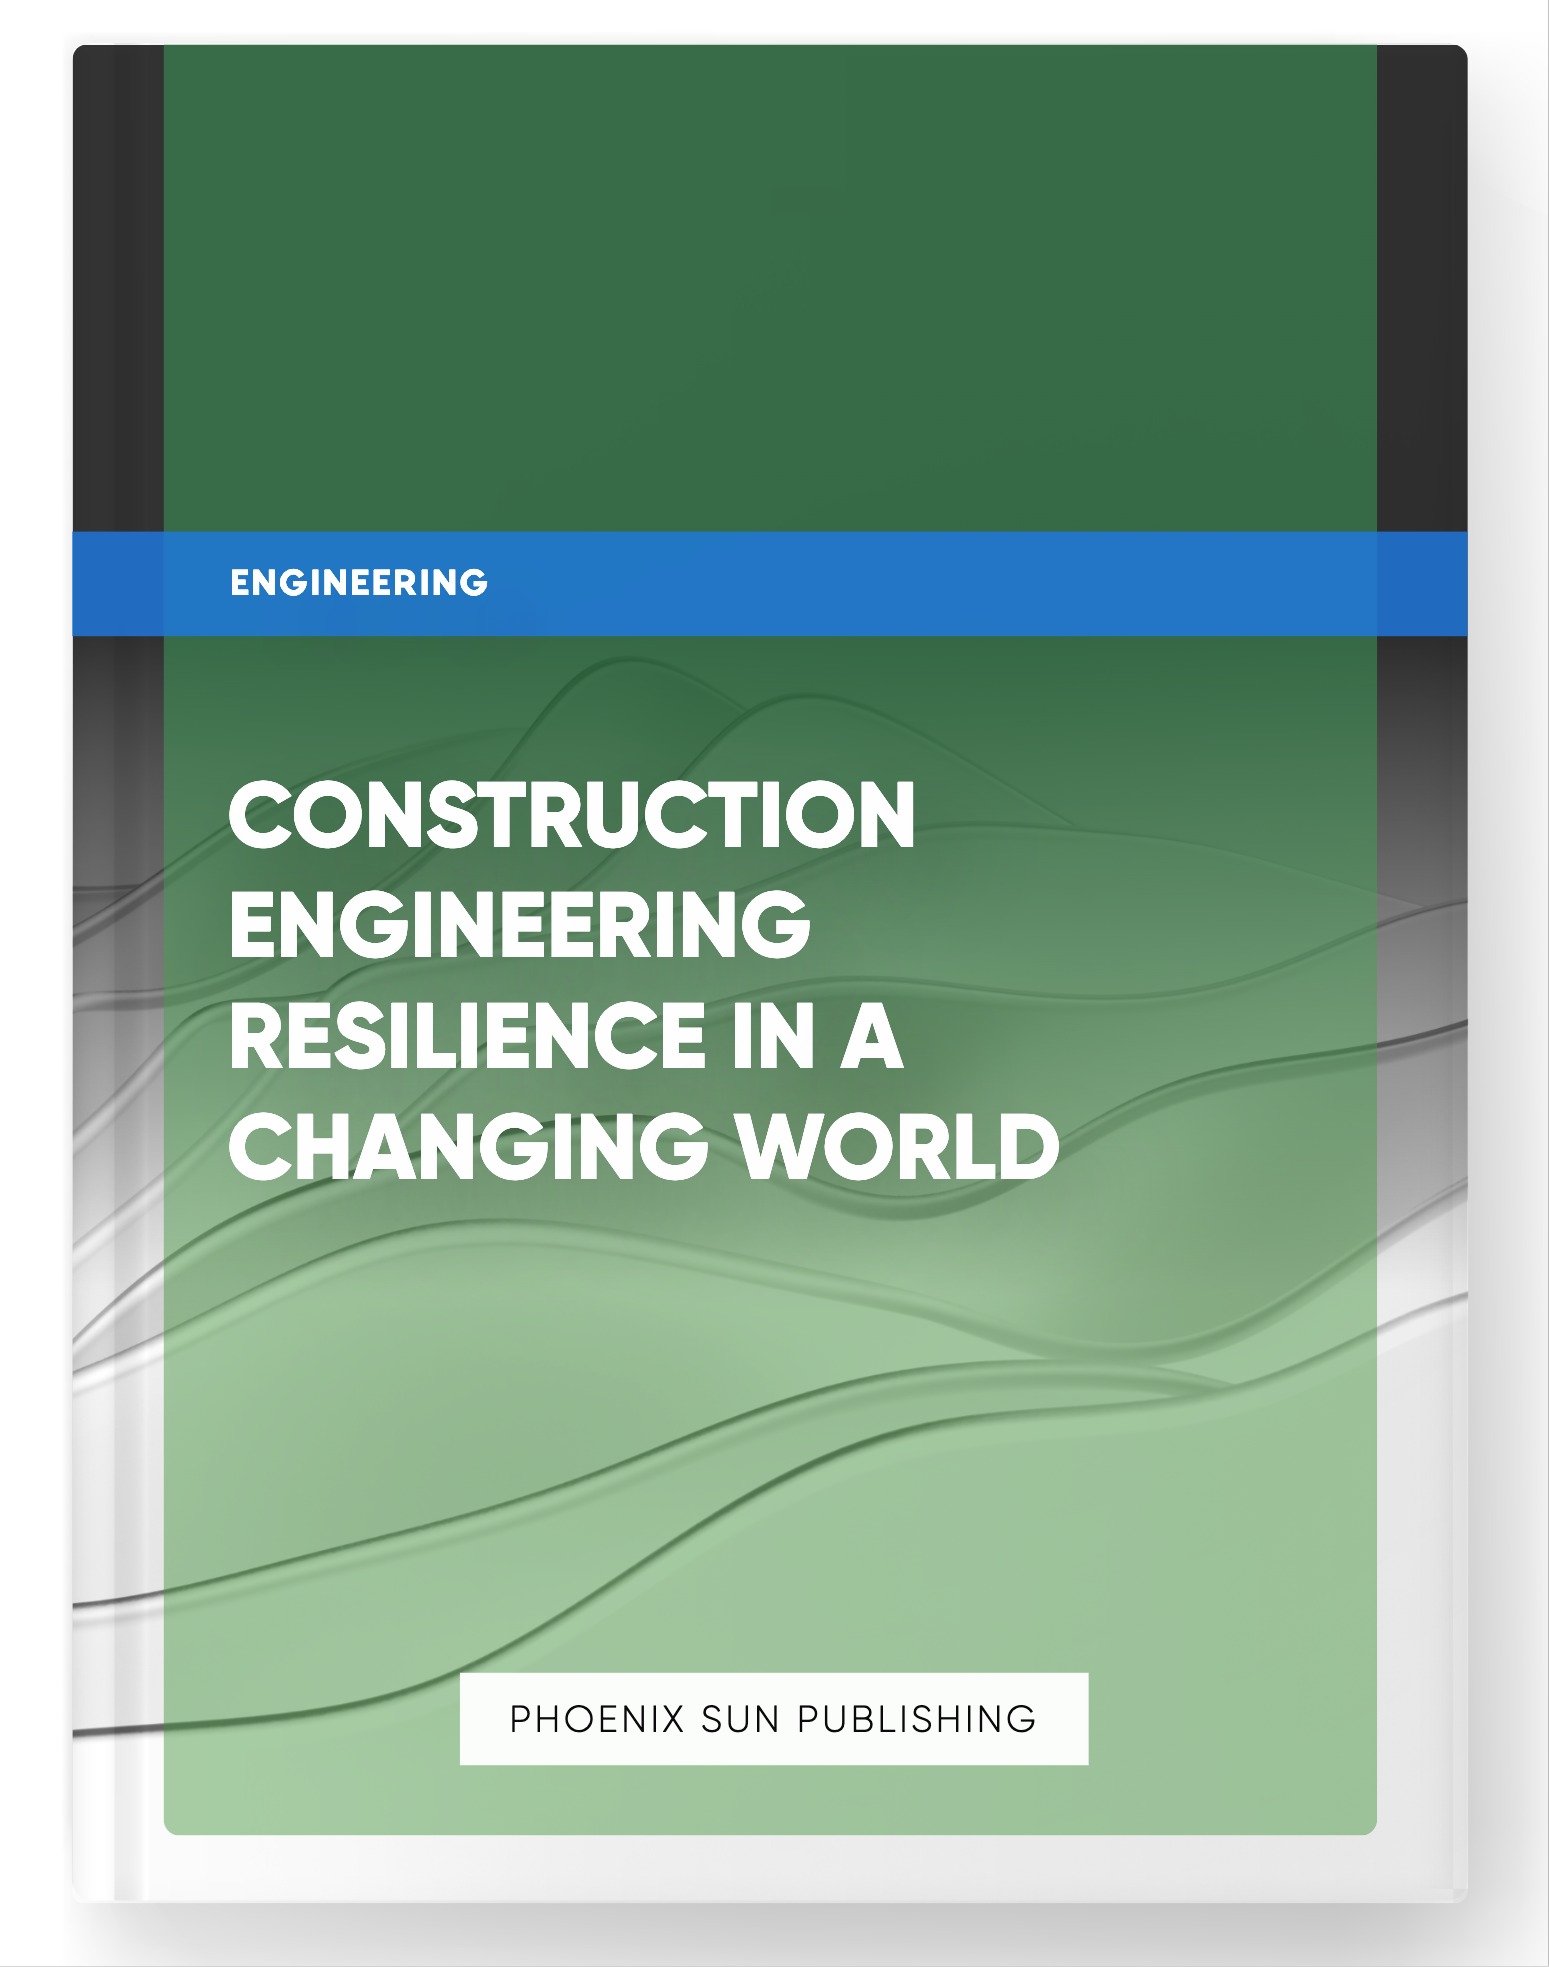 Construction Engineering Resilience in a Changing World